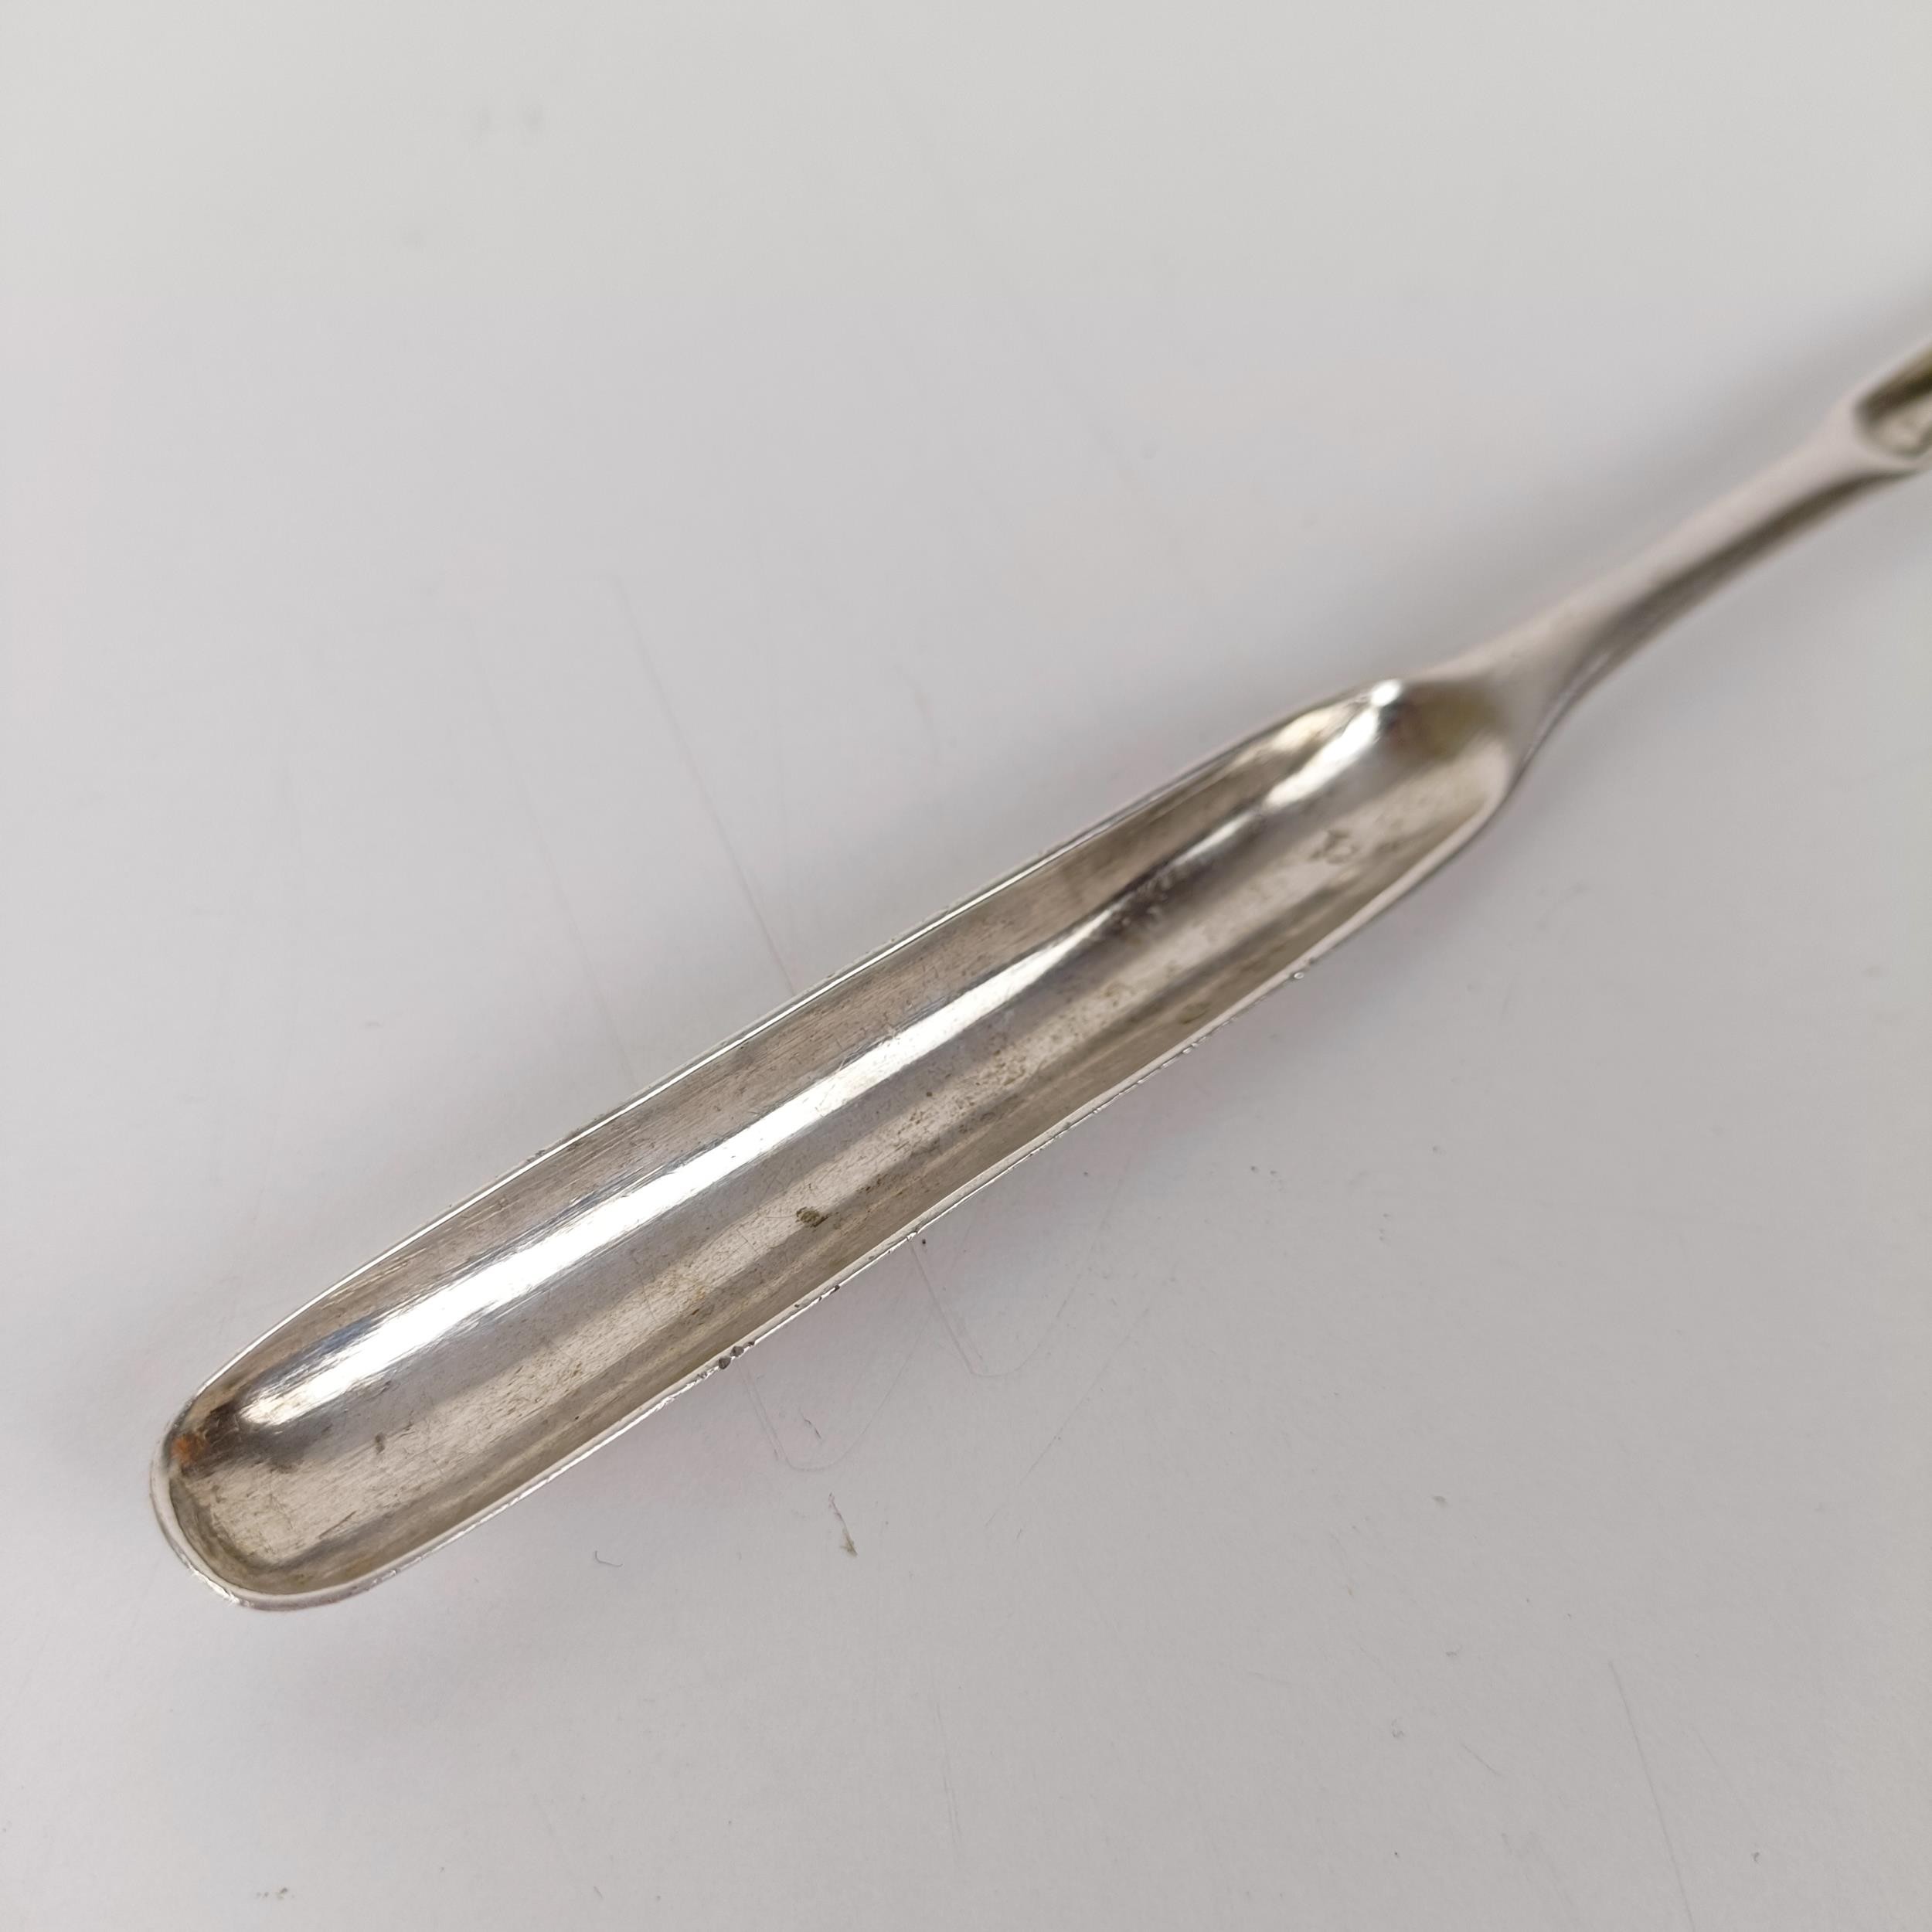 An 18th/19th century silver marrow scoop, makers mark only, 0.9 ozt - Image 2 of 6